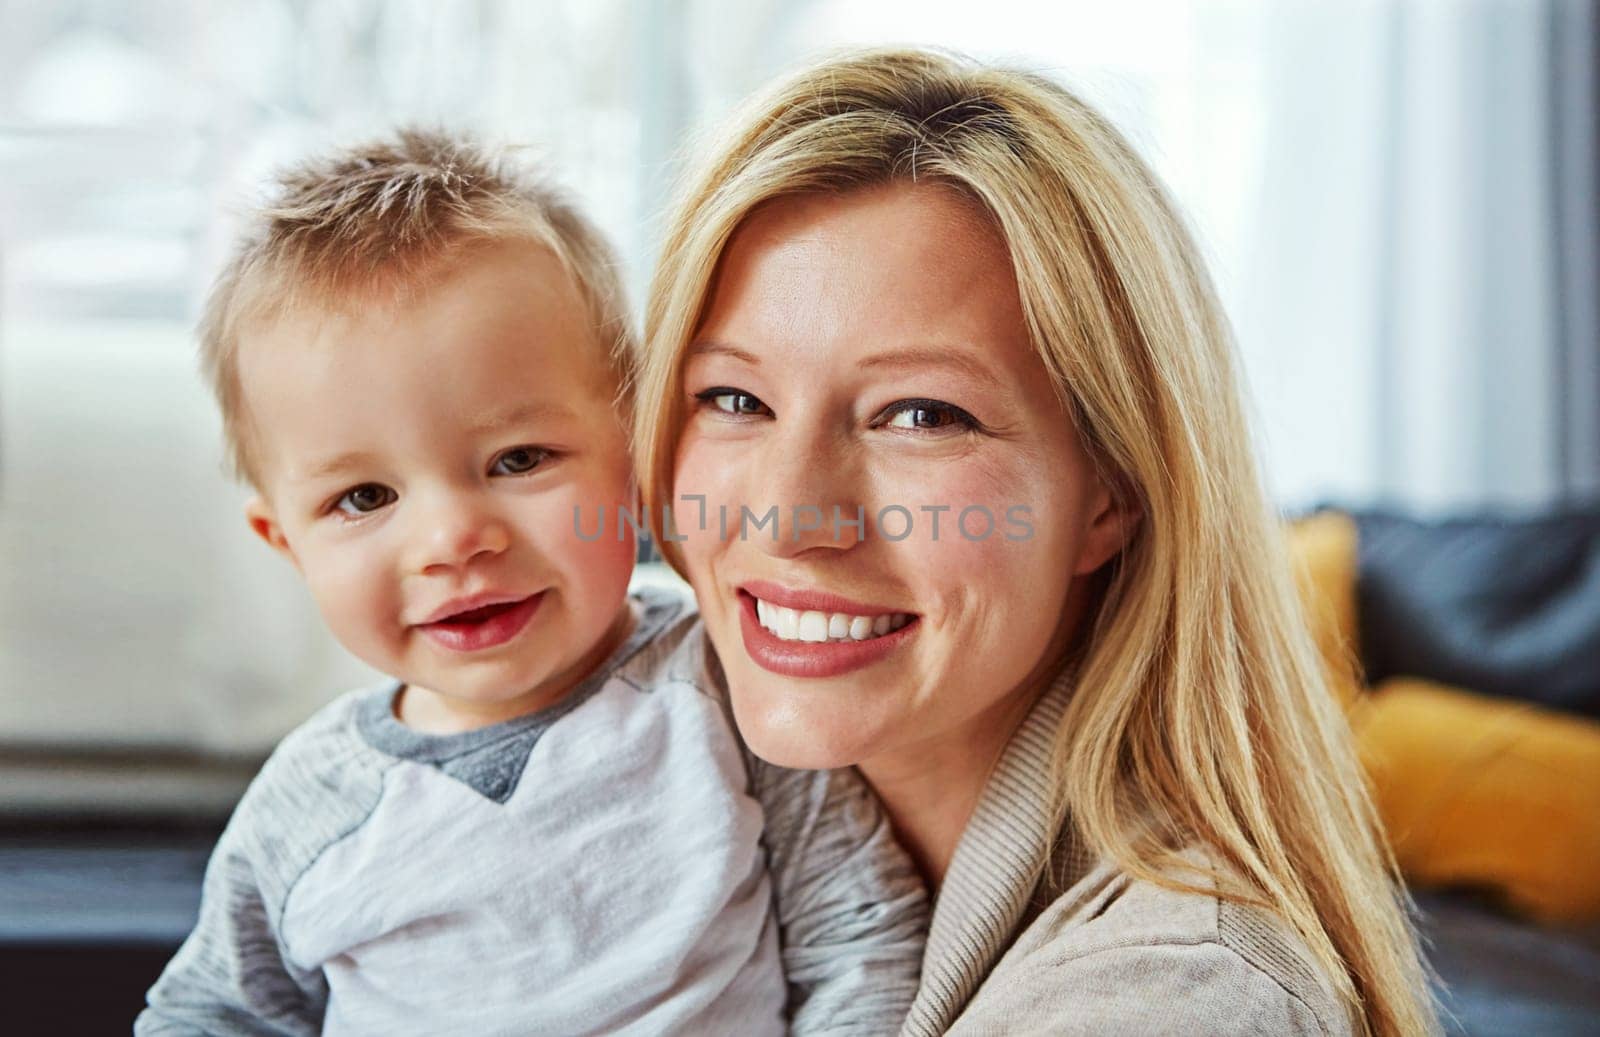 I love my role as a Mother. Closeup shot of a young woman spending the day at home with her little boy